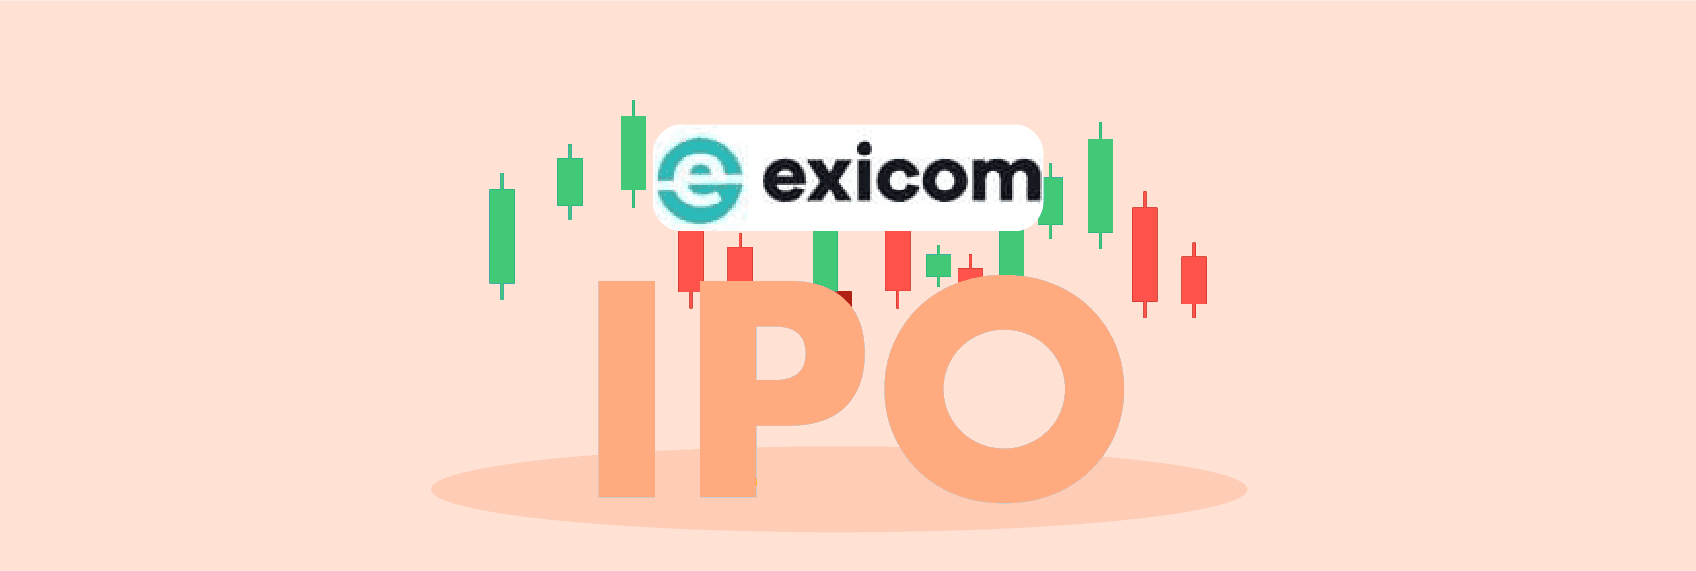 Exicom-Tele-Systems-IPO.png